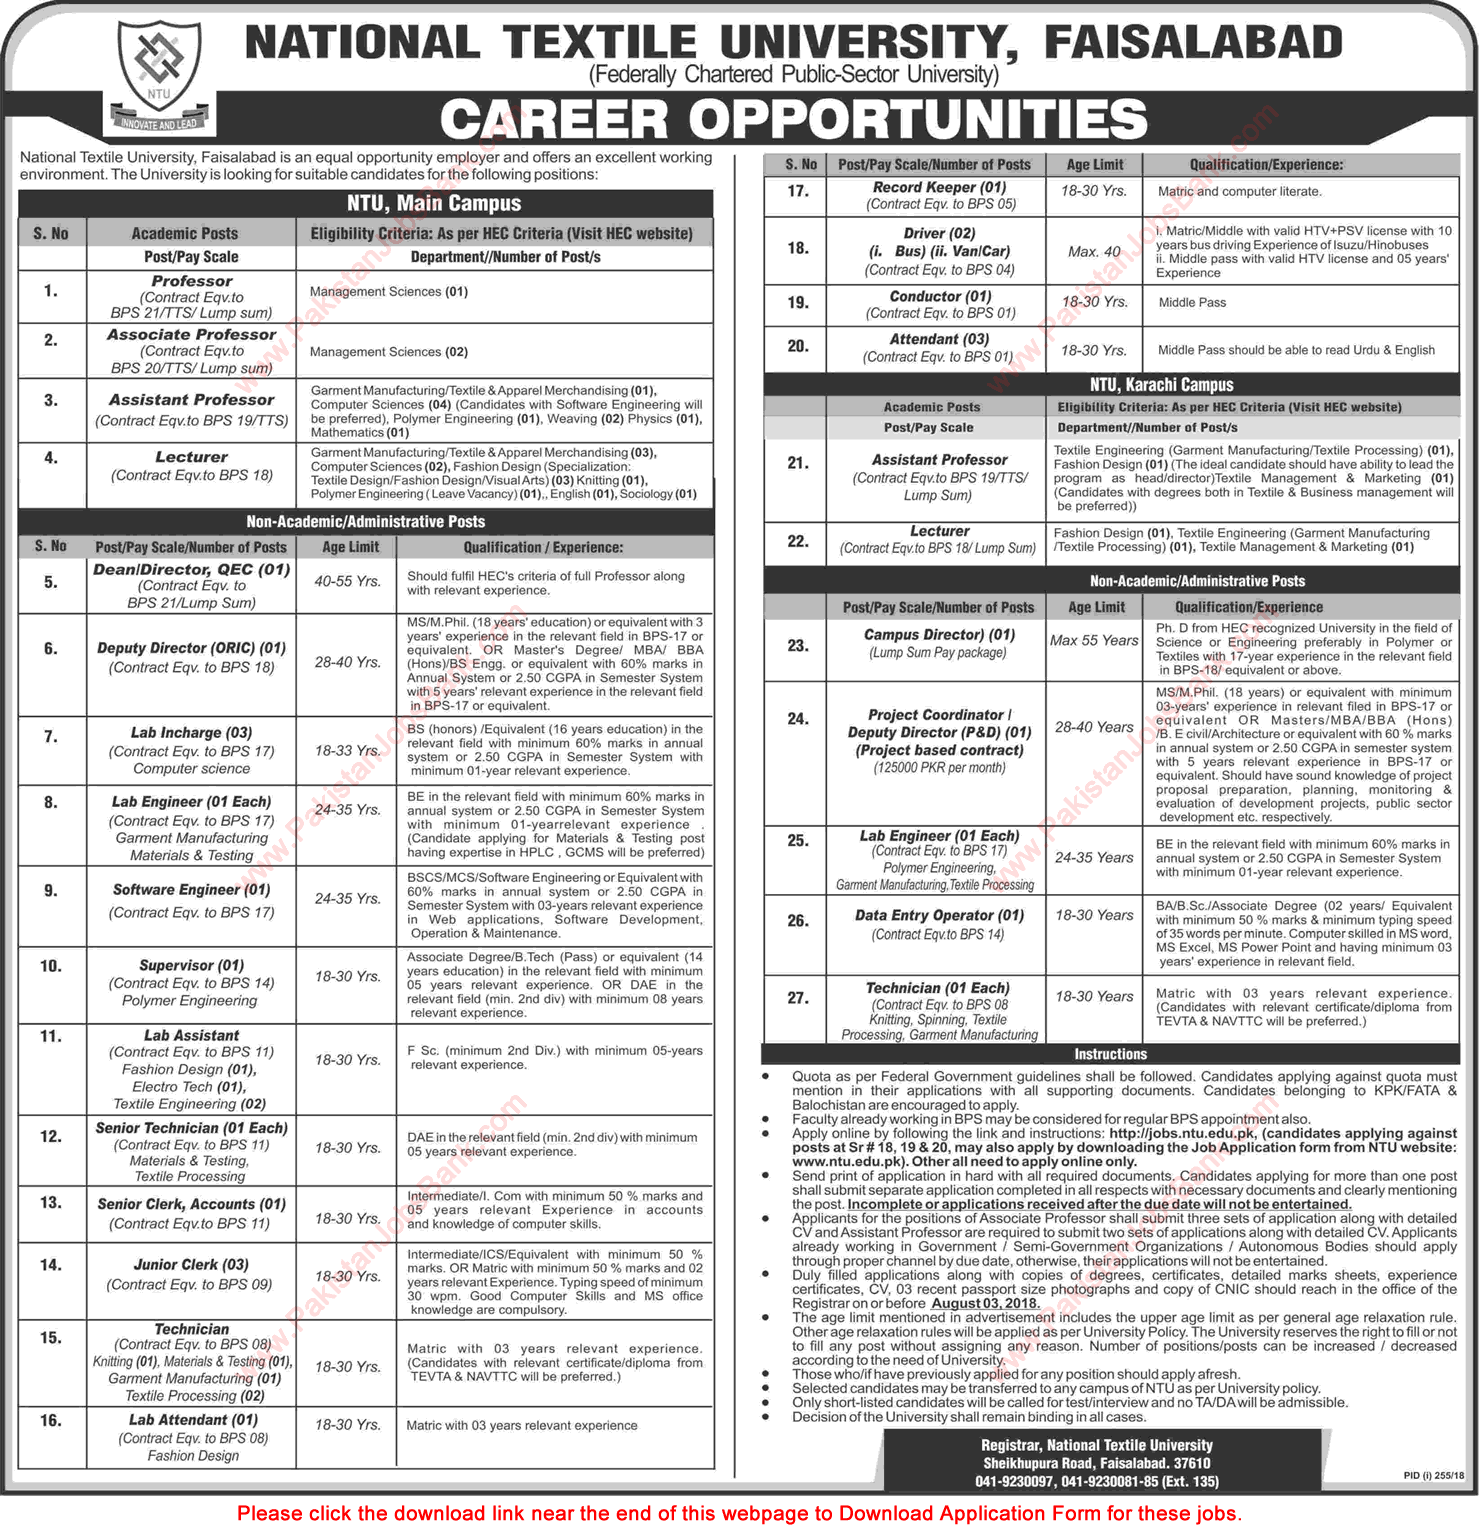 National Textile University Faisalabad Jobs July 2018 Application Form Teaching Faculty & Others Latest